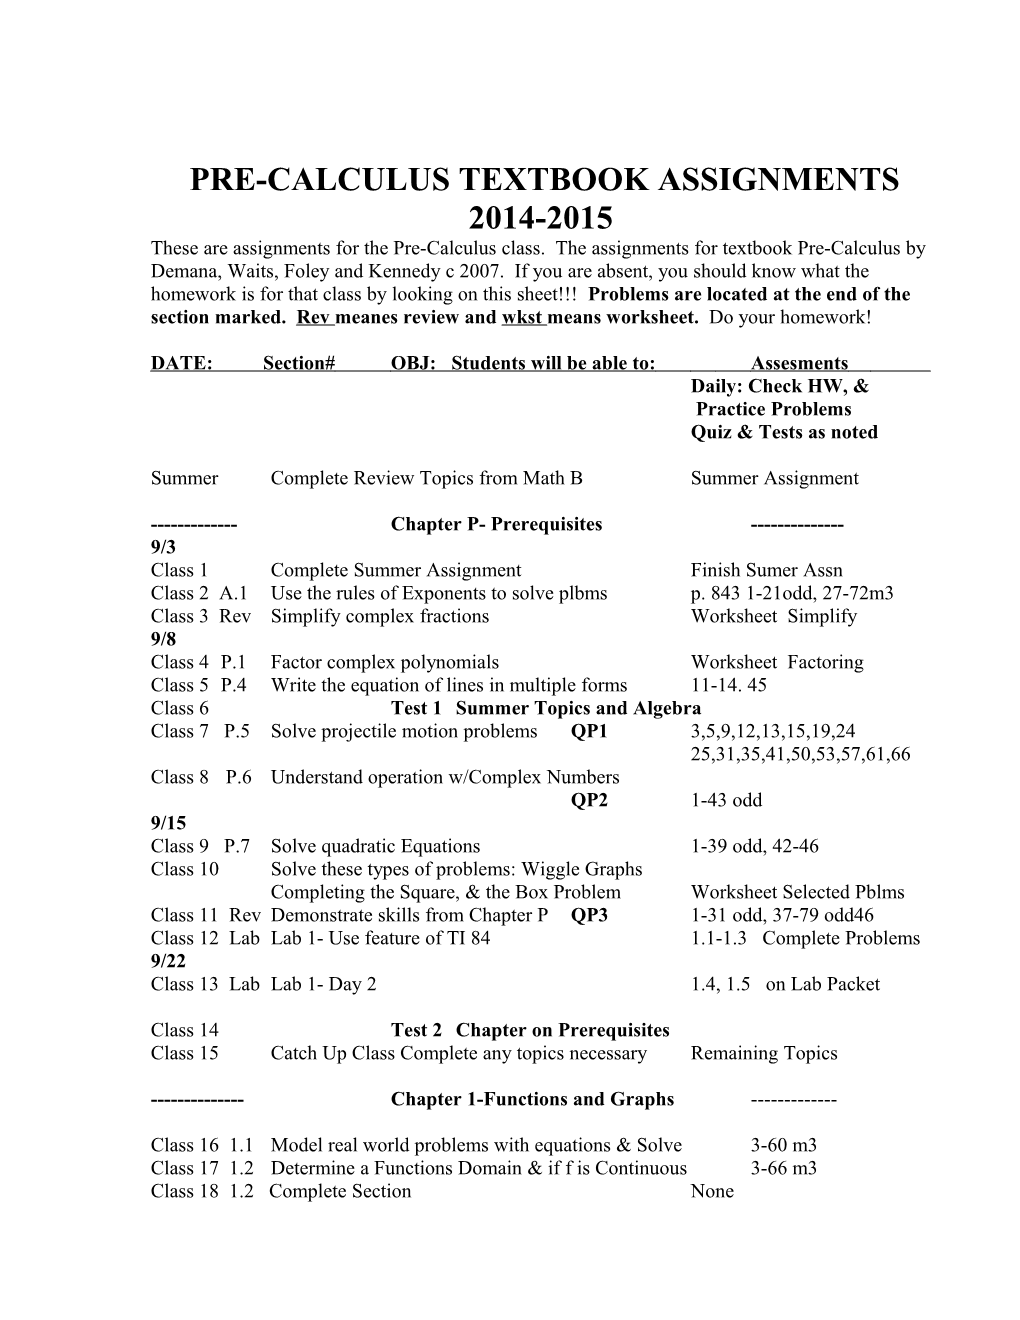 AP Calculus Assignments for Textbook Calculus by Finney, Demana, Waits and Kennedy C 2003